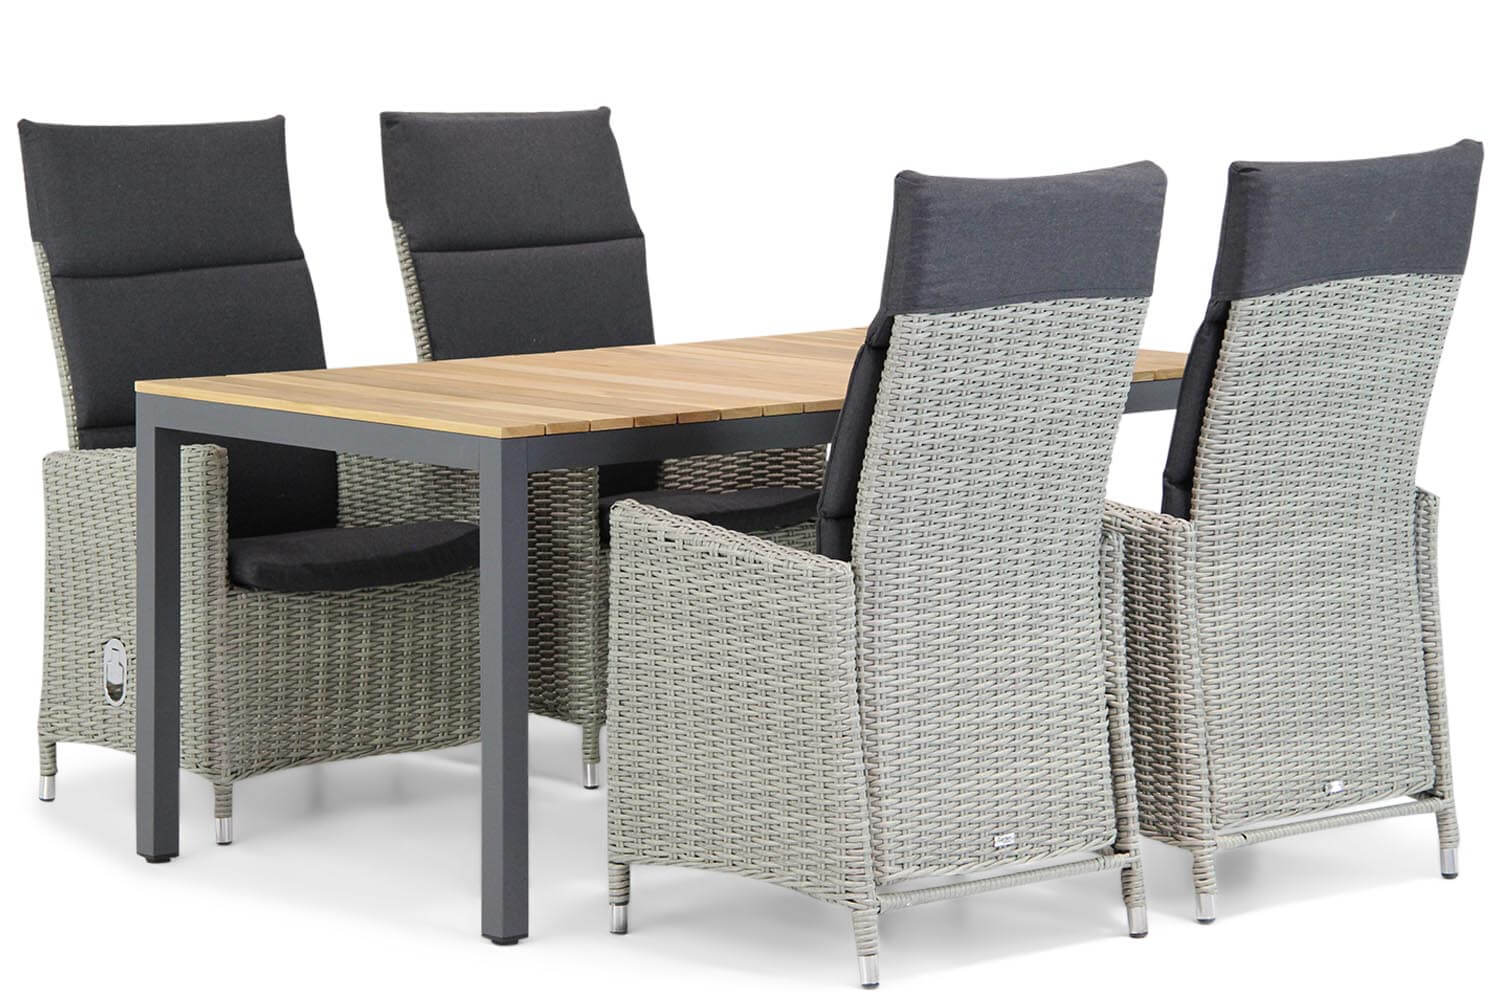 Garden Collections Madera Mazzarino 160 cm dining tuinset 5 delig